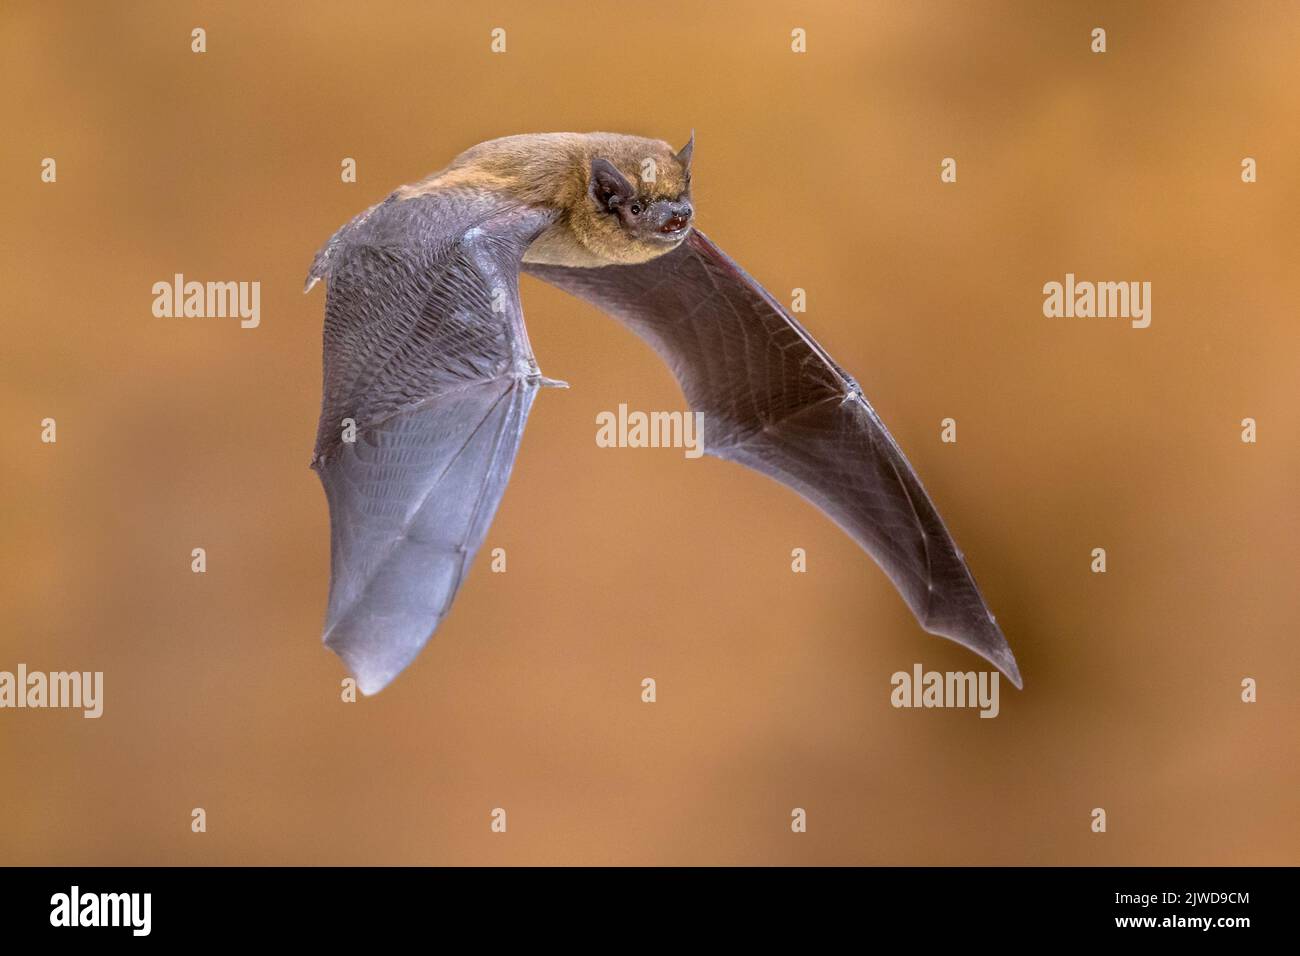 Flying pipistrelle bat (Pipistrellus pipistrellus) action shot seen from side on wooden attic of house with bright background Stock Photo